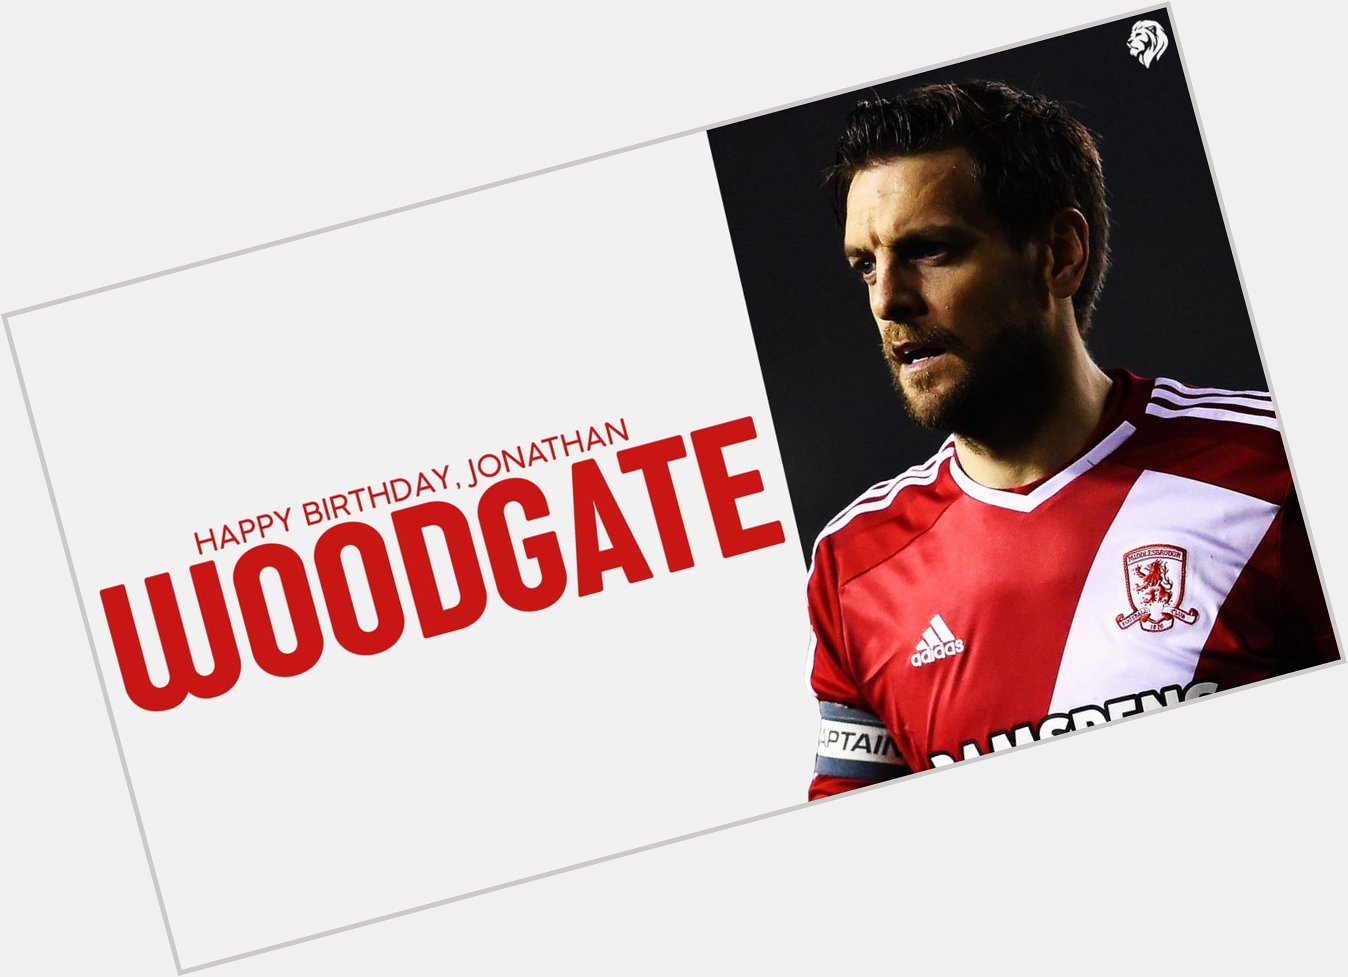 Happy Birthday to ex-player and current coach Jonathan Woodgate!  